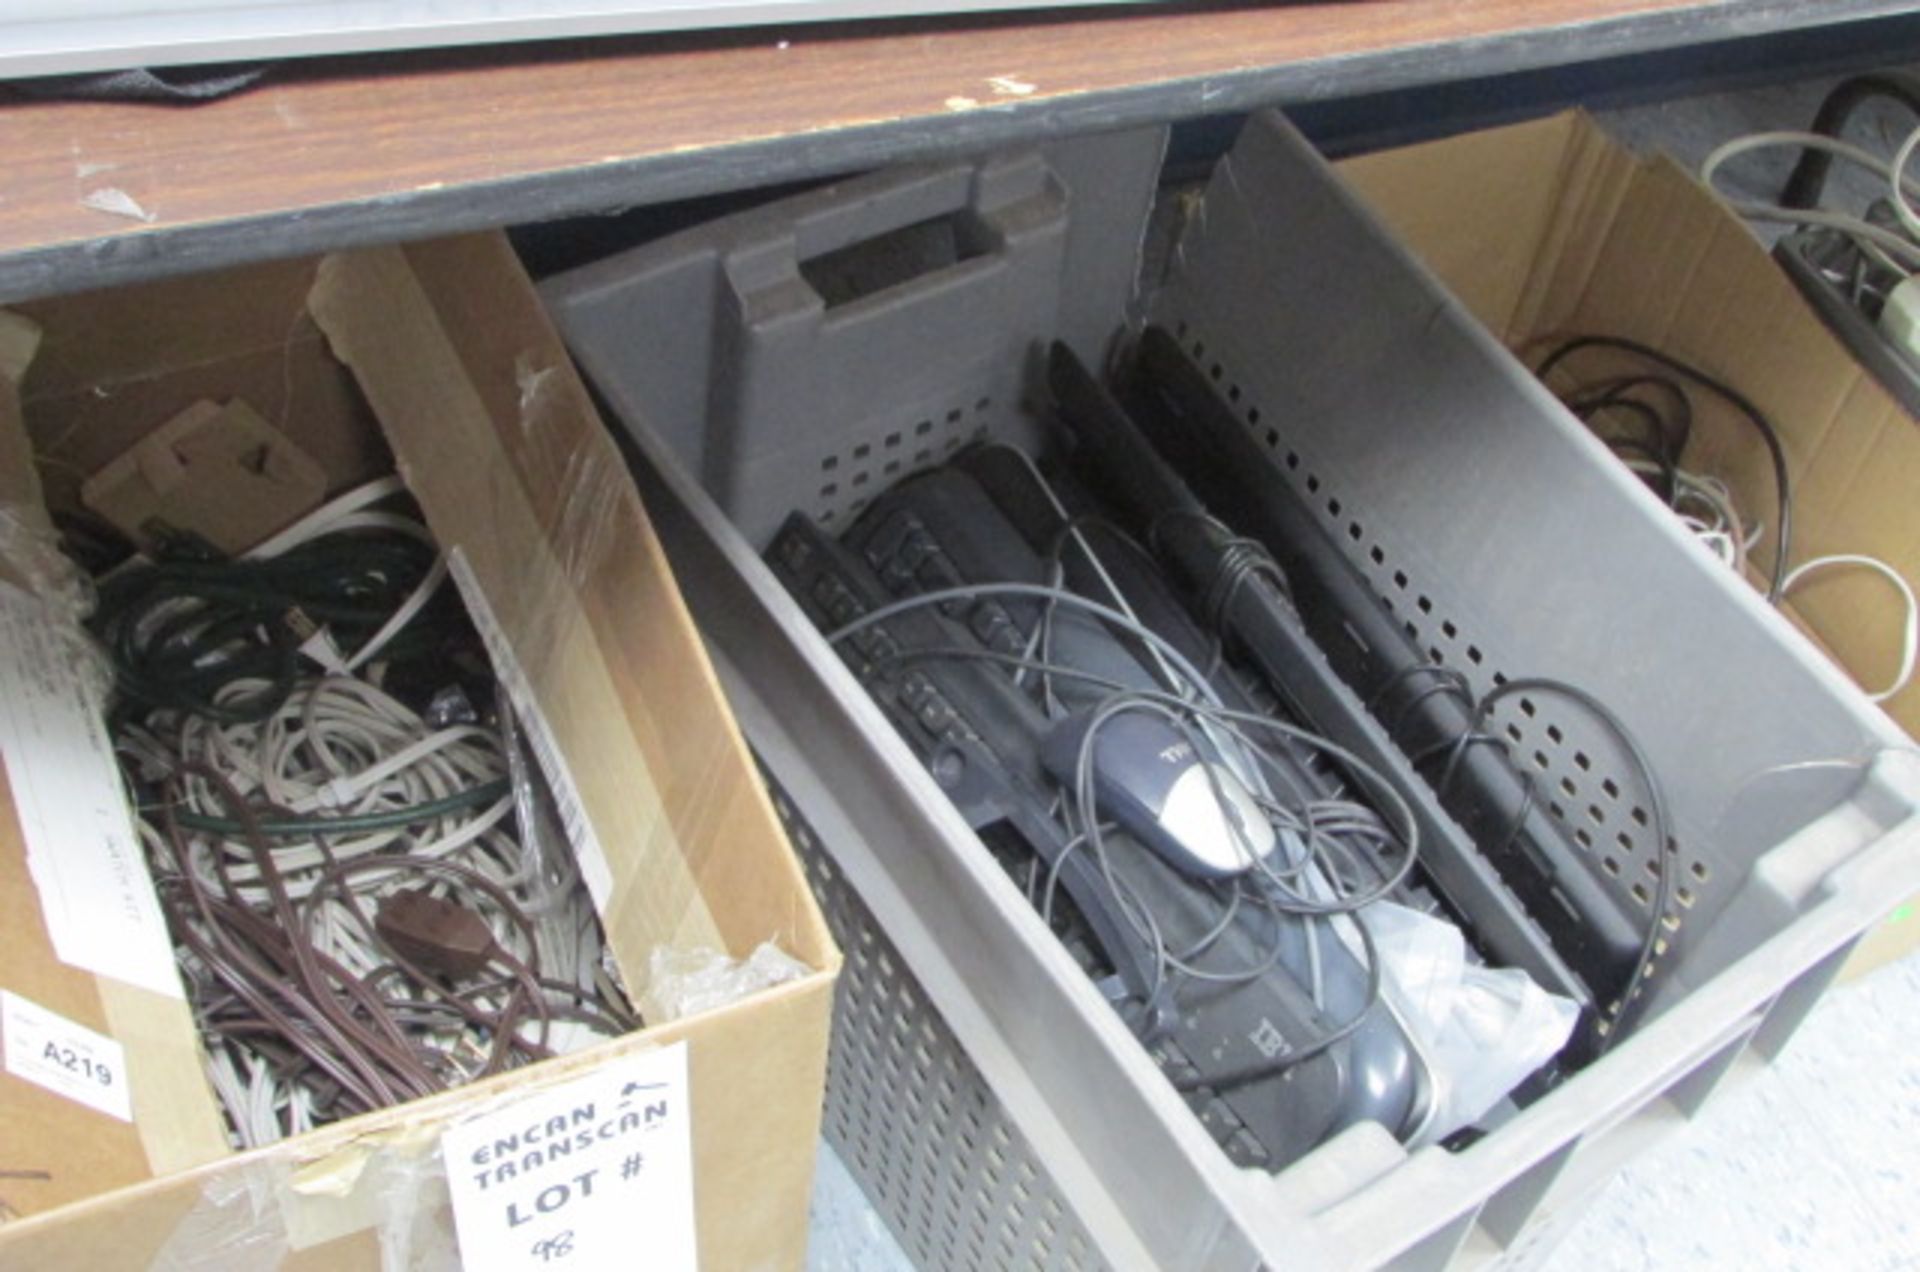 LOT: COMPUTER, PRINTER, FAX, WIRES, ACCESSORIES ETC. - Image 6 of 7